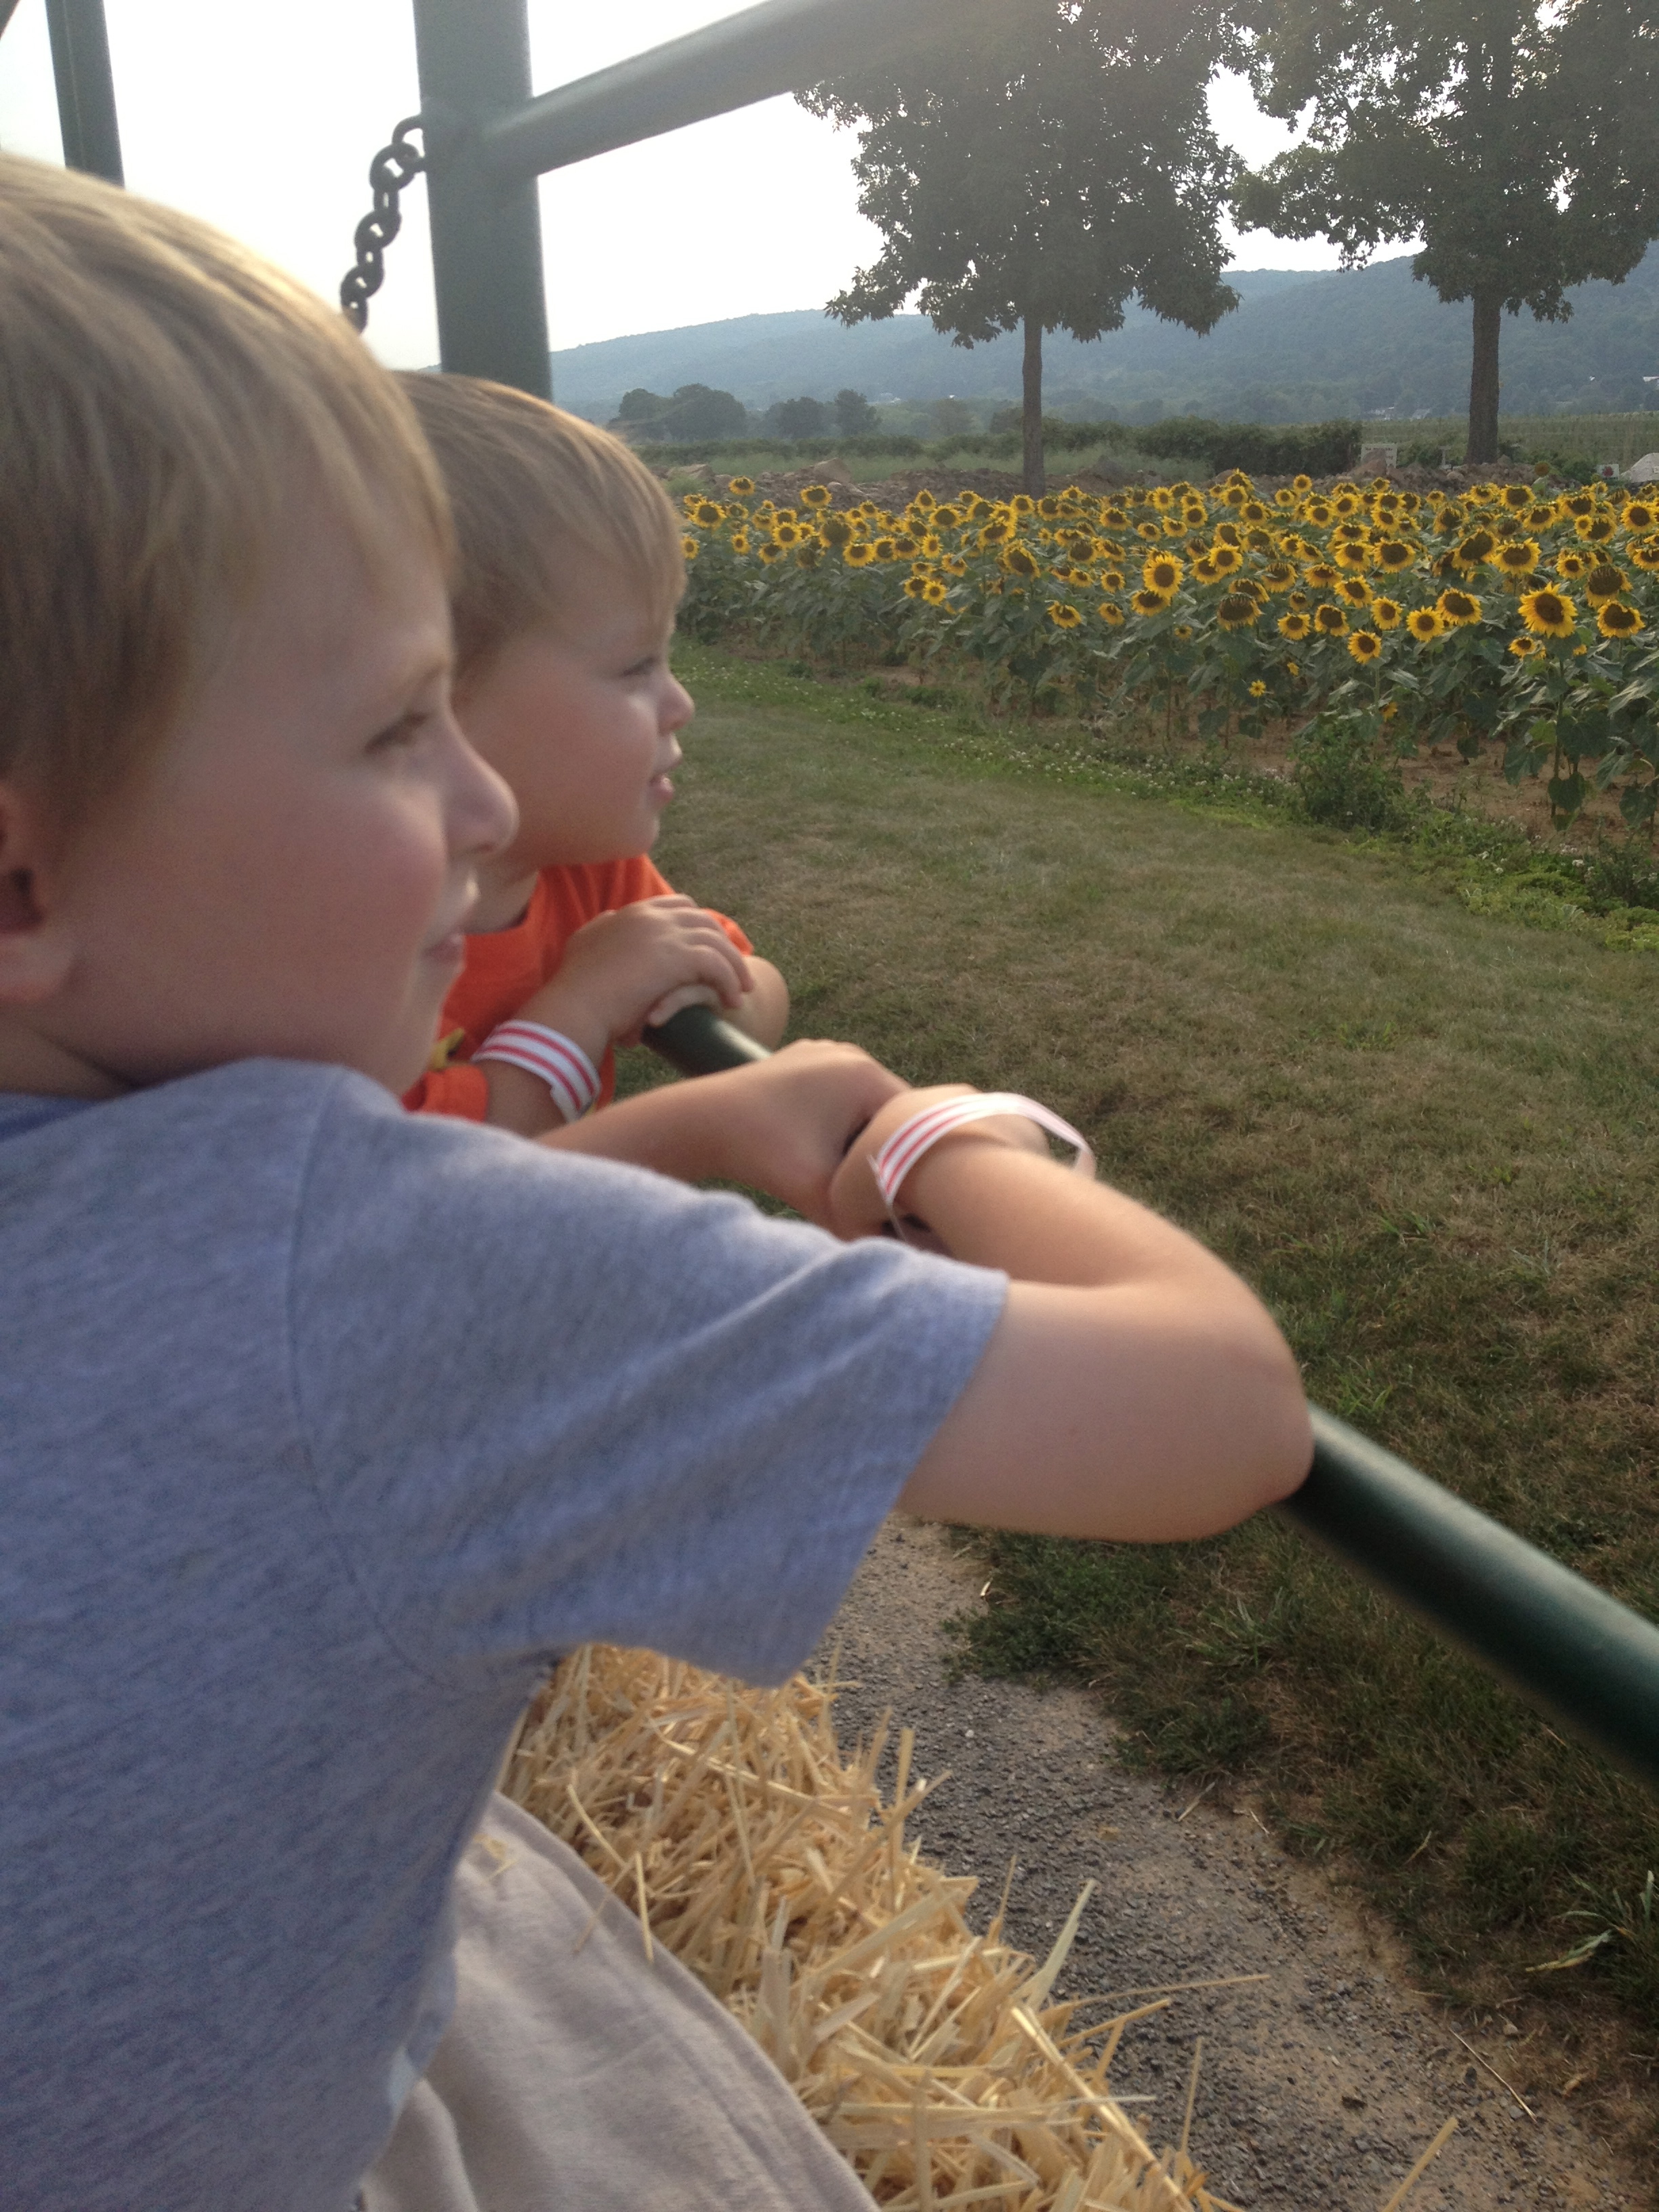 The boys were captivated by all the sights around the farm!